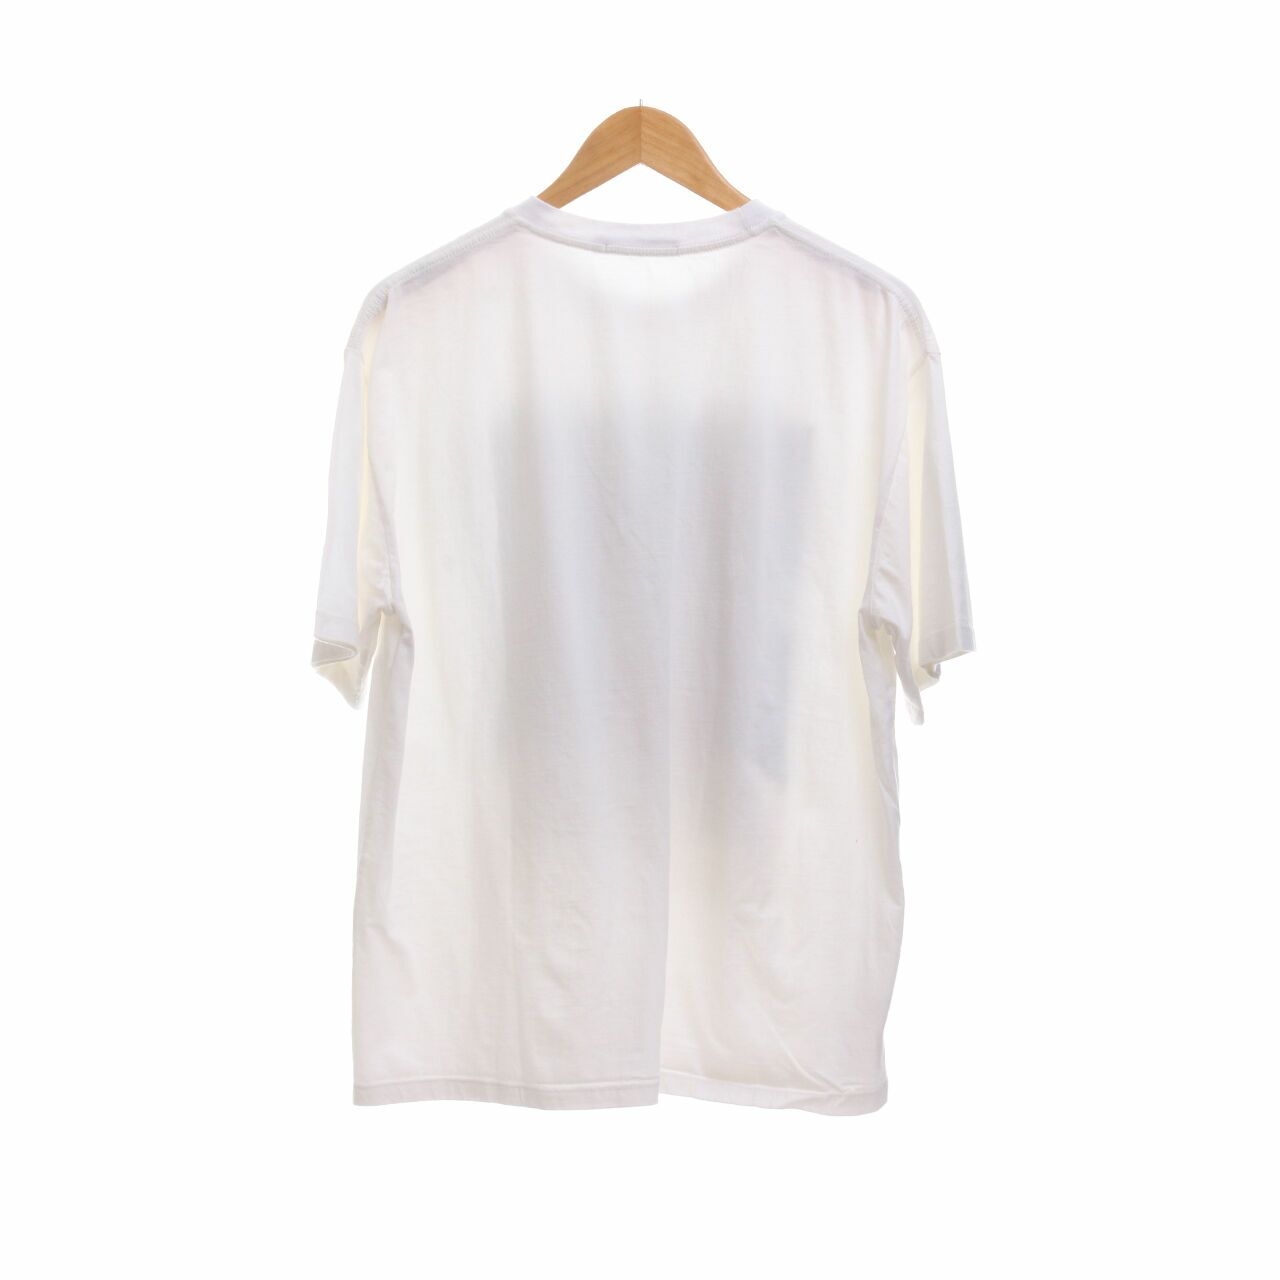 Connive White Printed T-Shirt